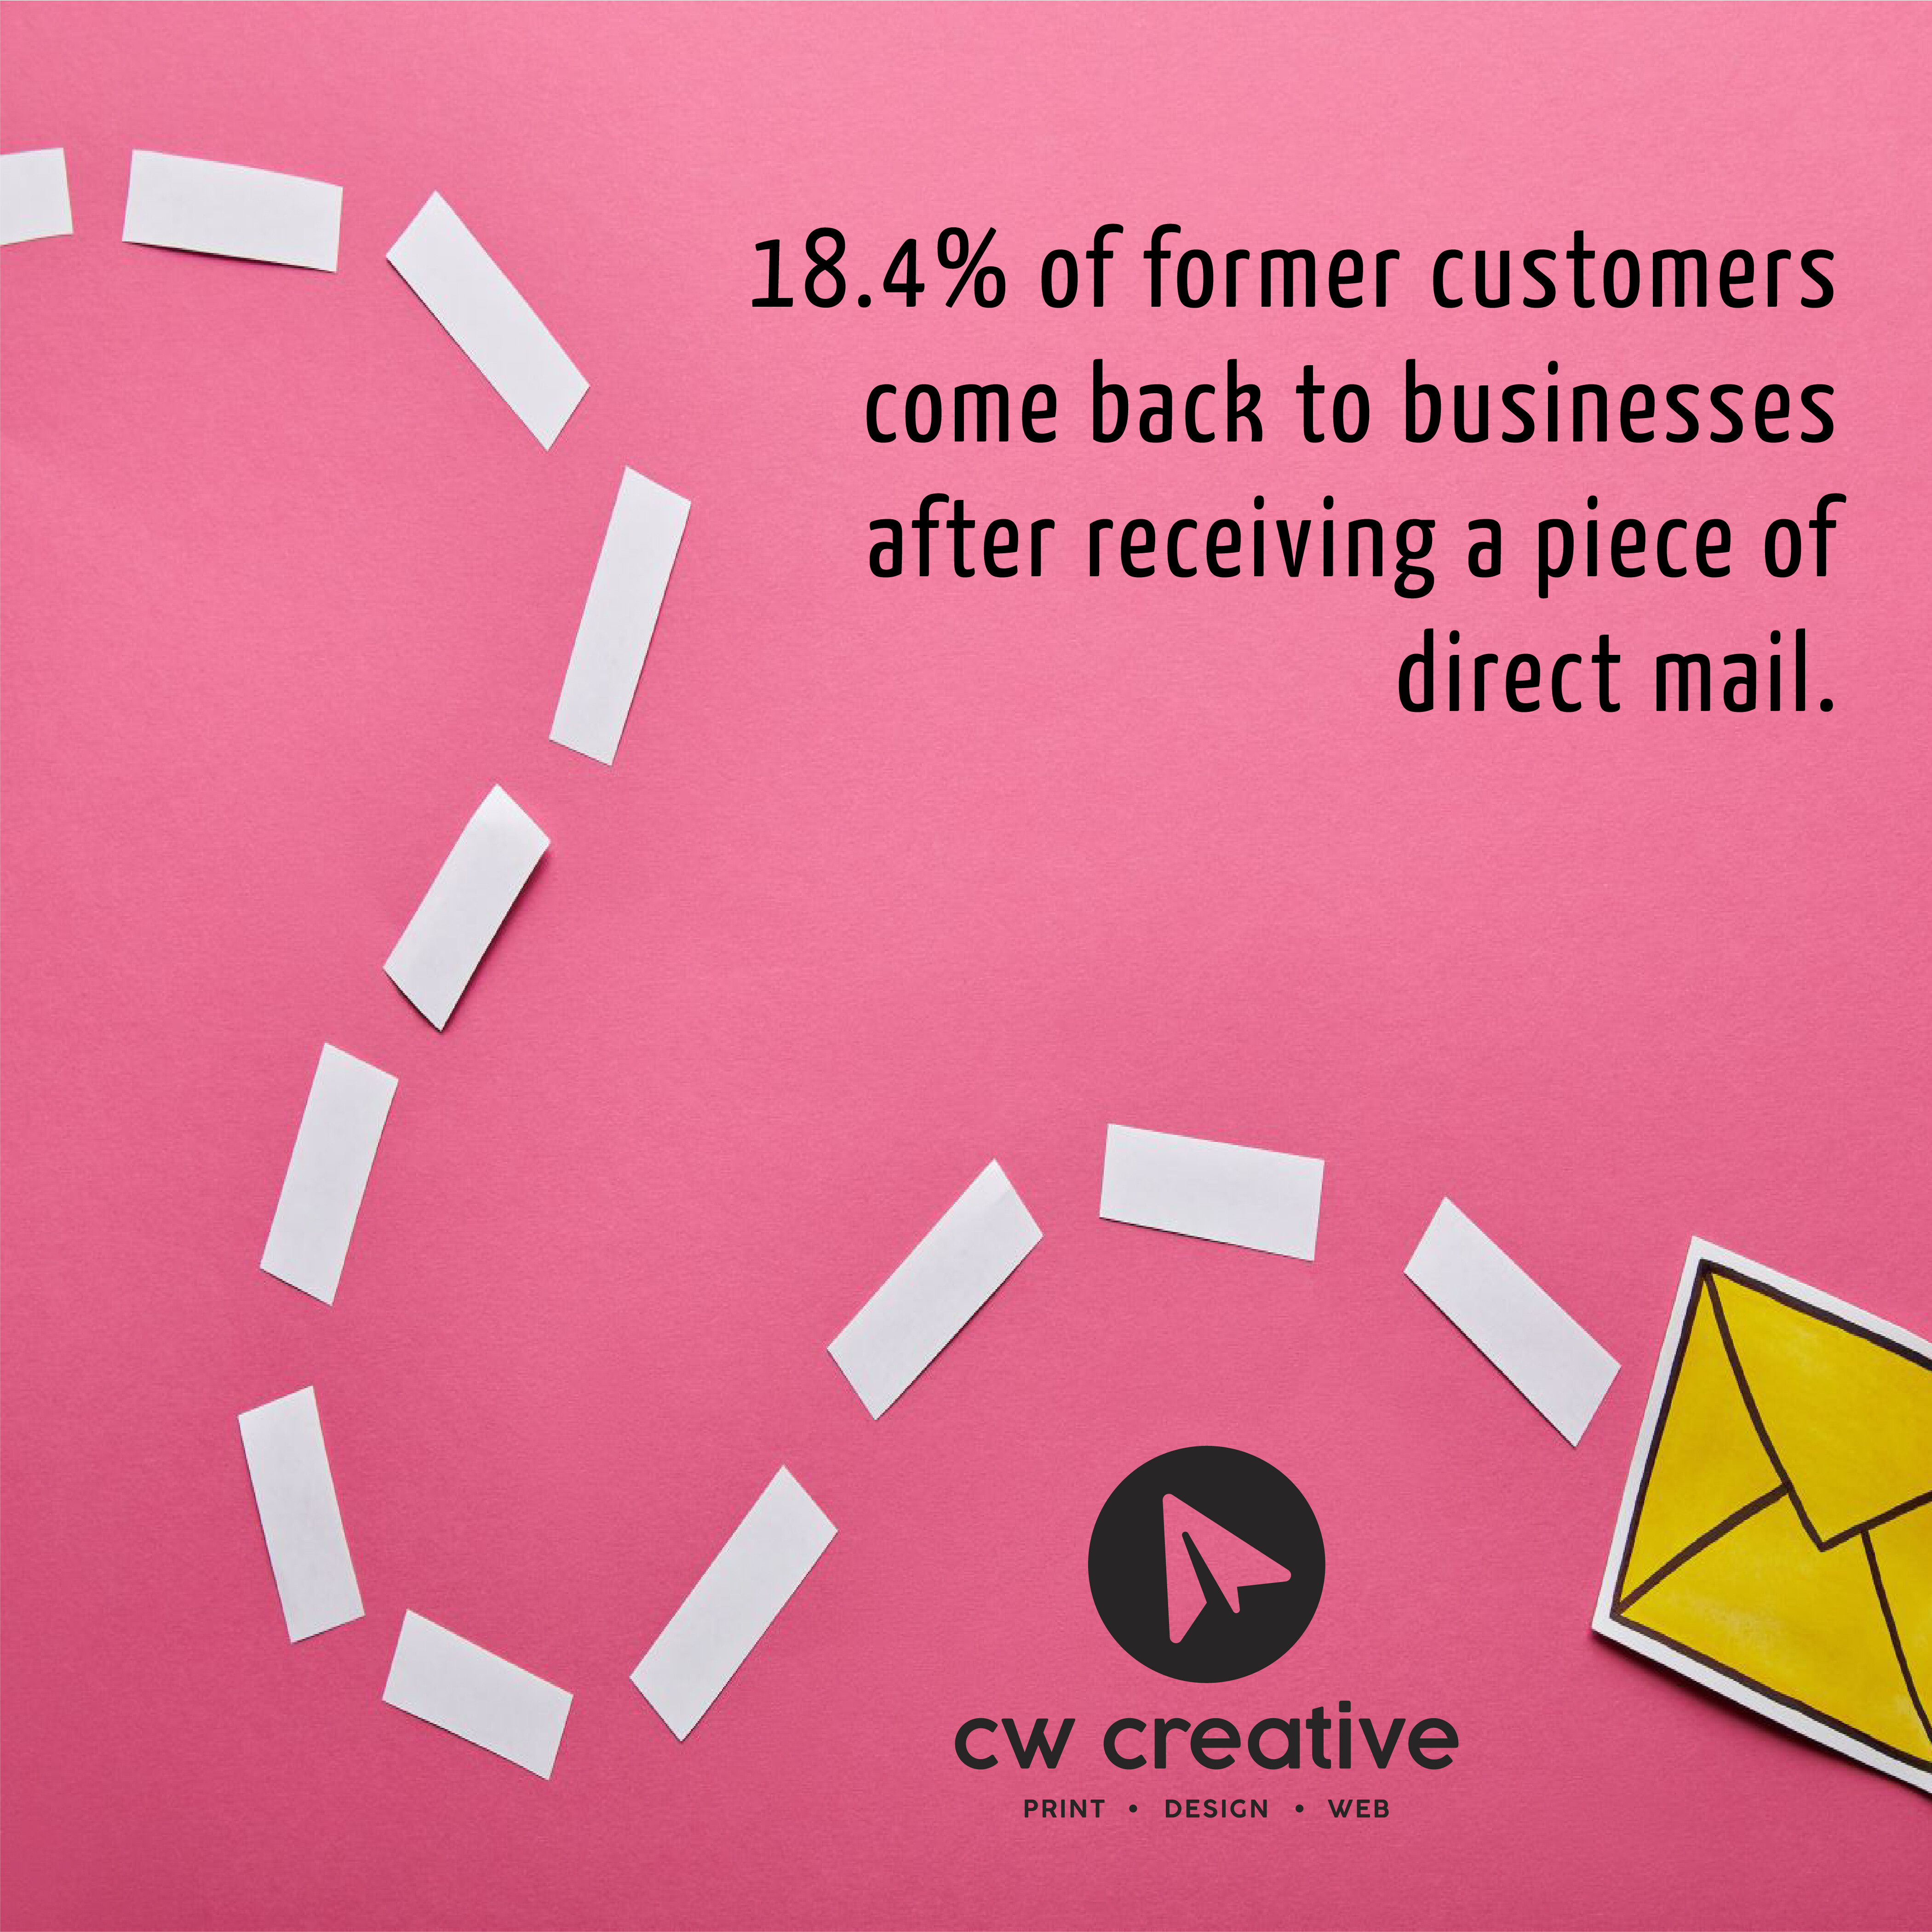 18.4% of former customers come back to businesses after receiving a piece of direct mail.